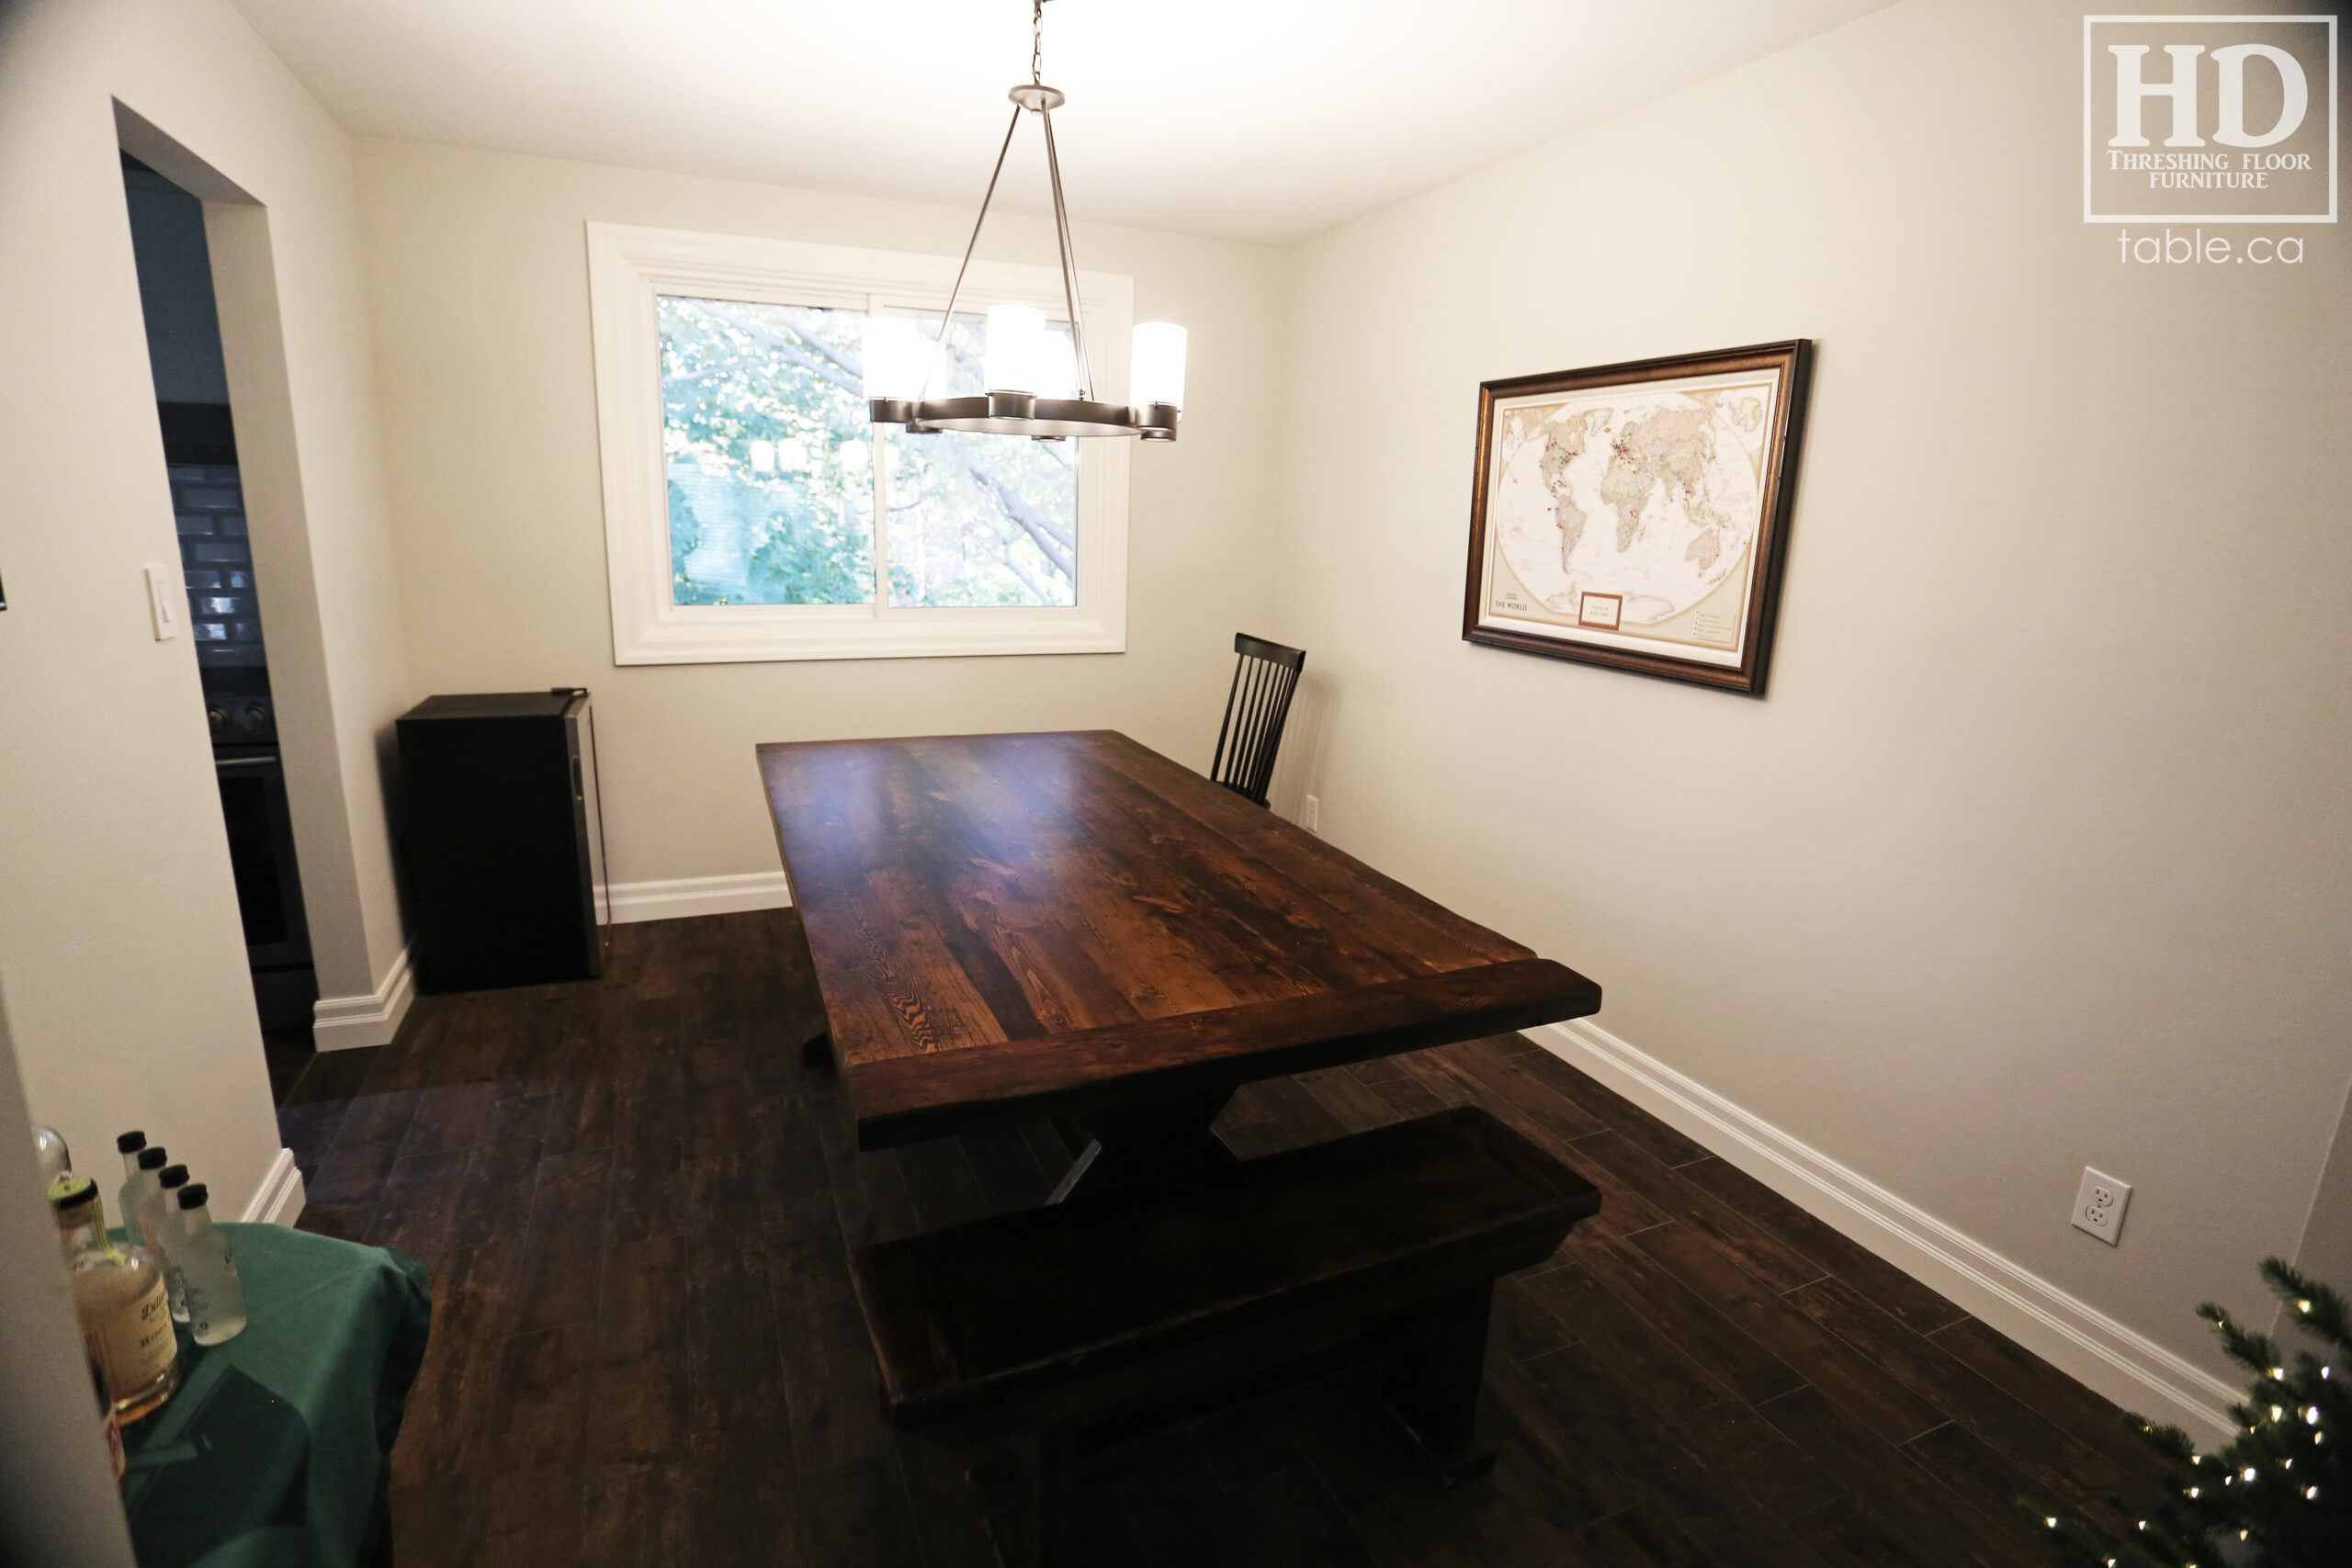 Reclaimed Wood Table with Black Stain Treatment Option by HD Threshing Floor Furniture / Cambridge, Ontario / www.table.ca